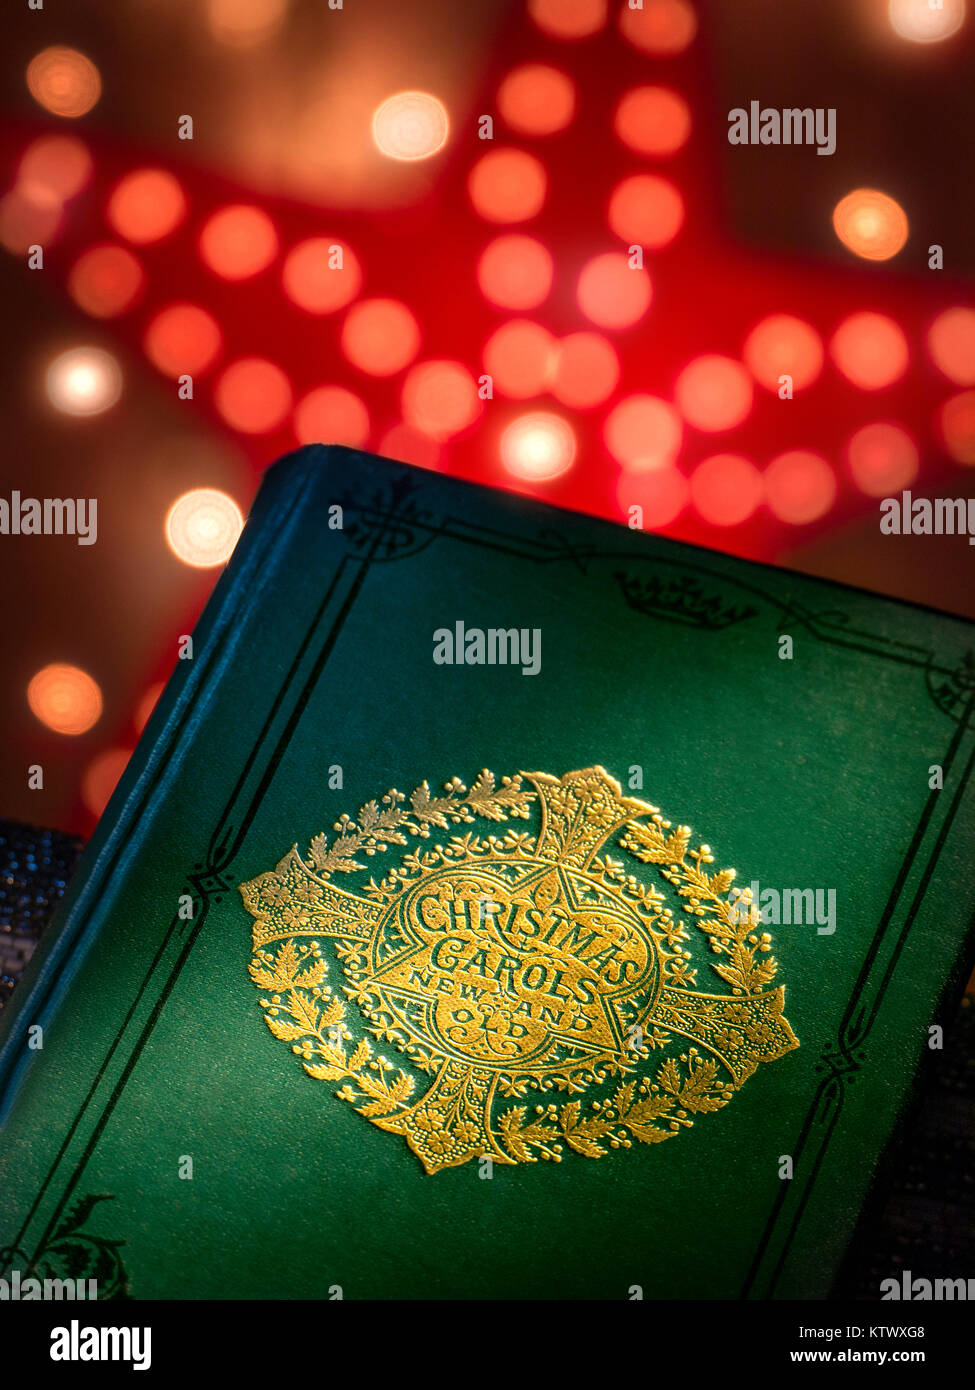 Christmas Carols song singing 'New and Old' music book cover with warm inviting festive Christmas lights behind Stock Photo